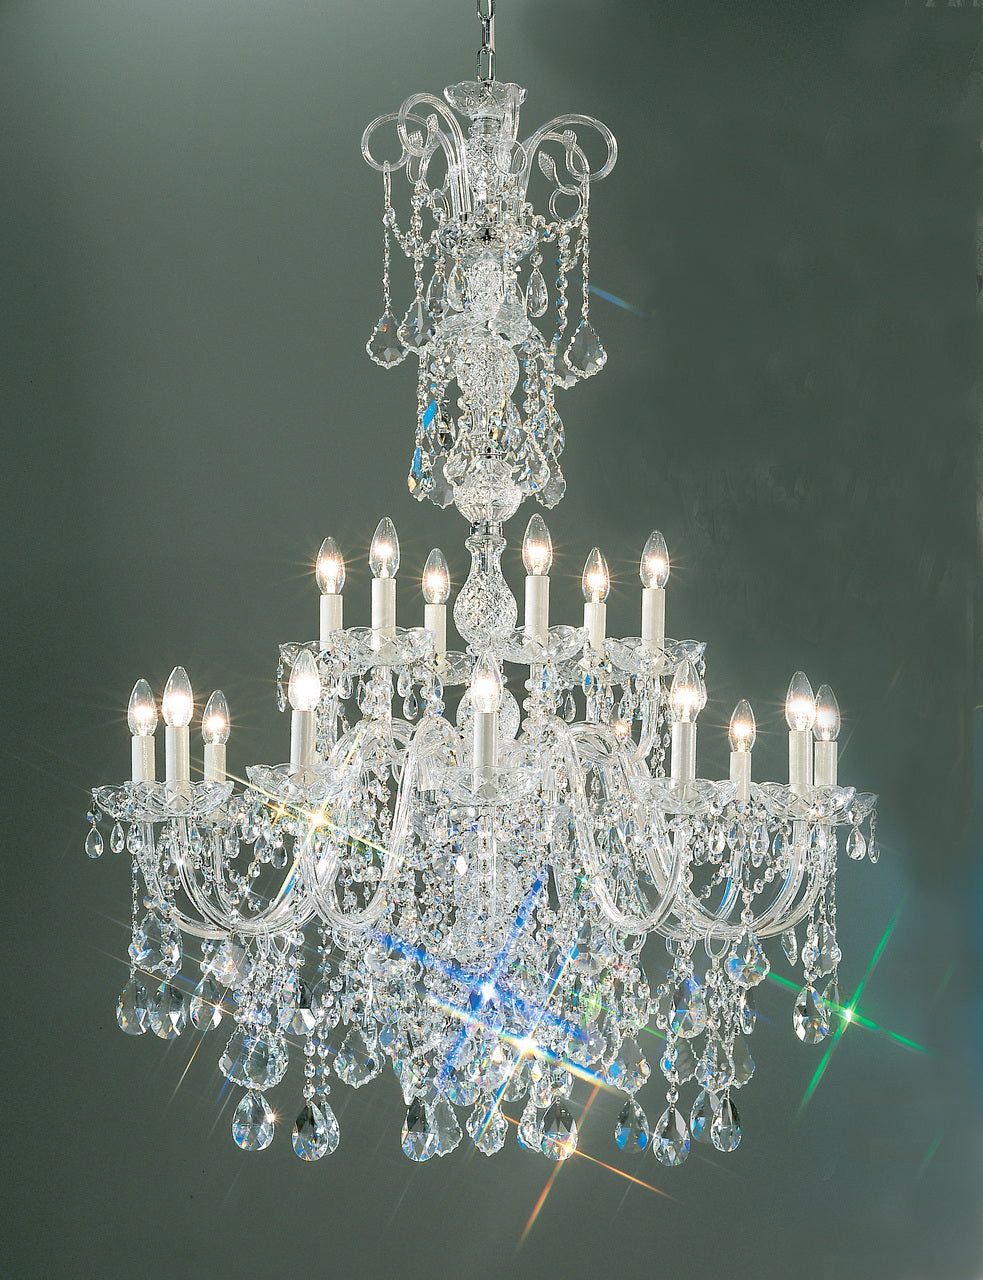 Classic Lighting 8263 G S Bohemia Crystal/Glass Chandelier in 24k Gold (Imported from Italy)